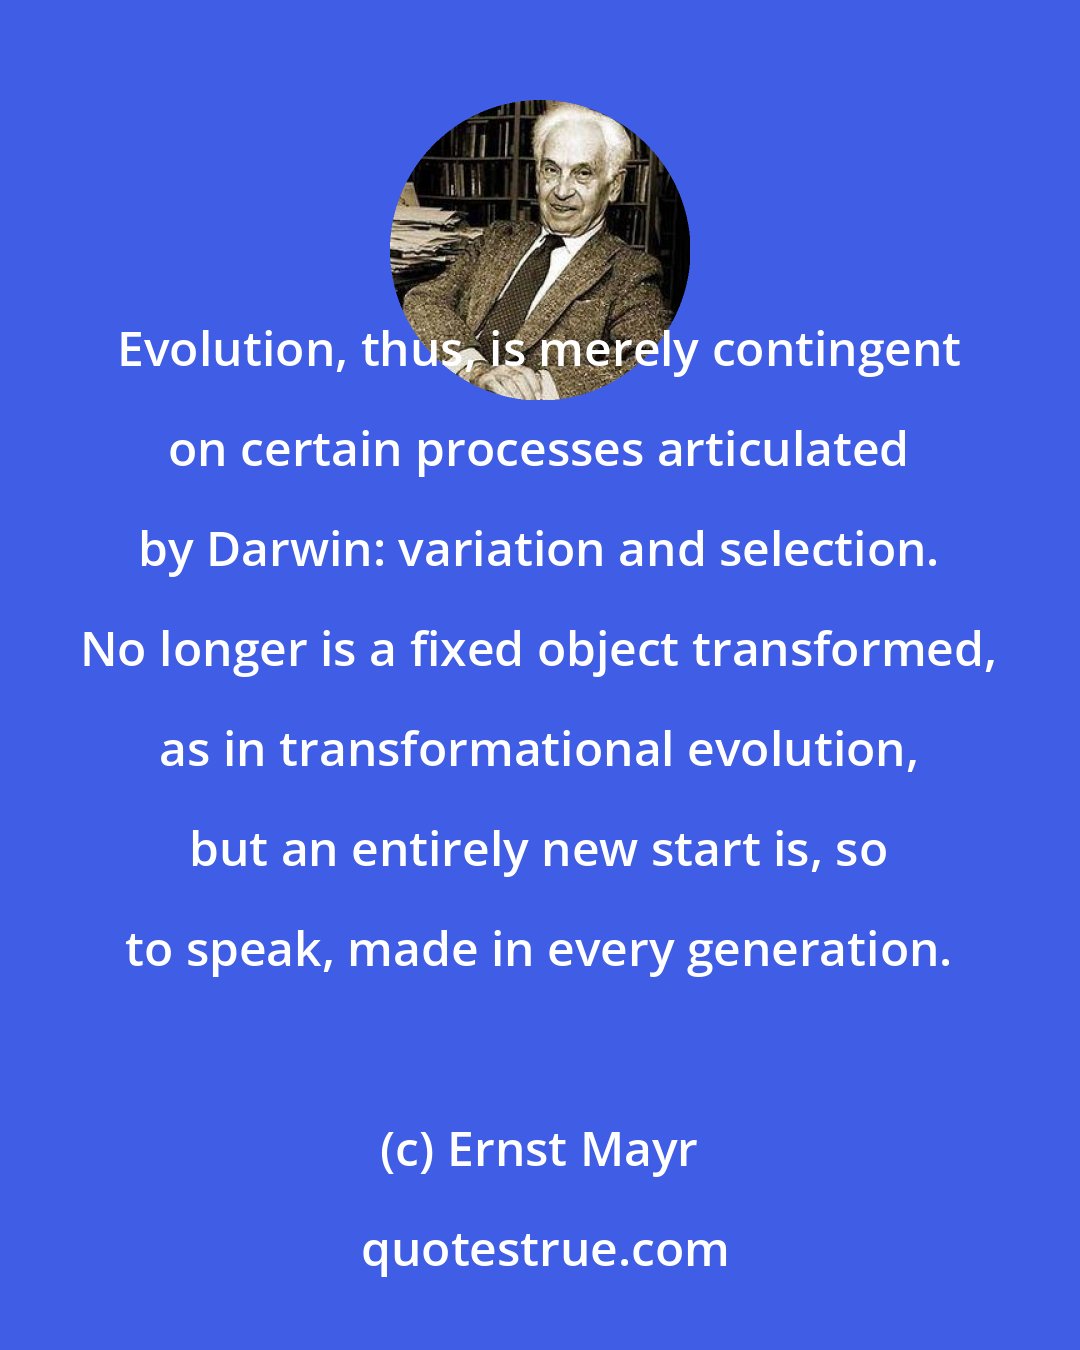 Ernst Mayr: Evolution, thus, is merely contingent on certain processes articulated by Darwin: variation and selection. No longer is a fixed object transformed, as in transformational evolution, but an entirely new start is, so to speak, made in every generation.